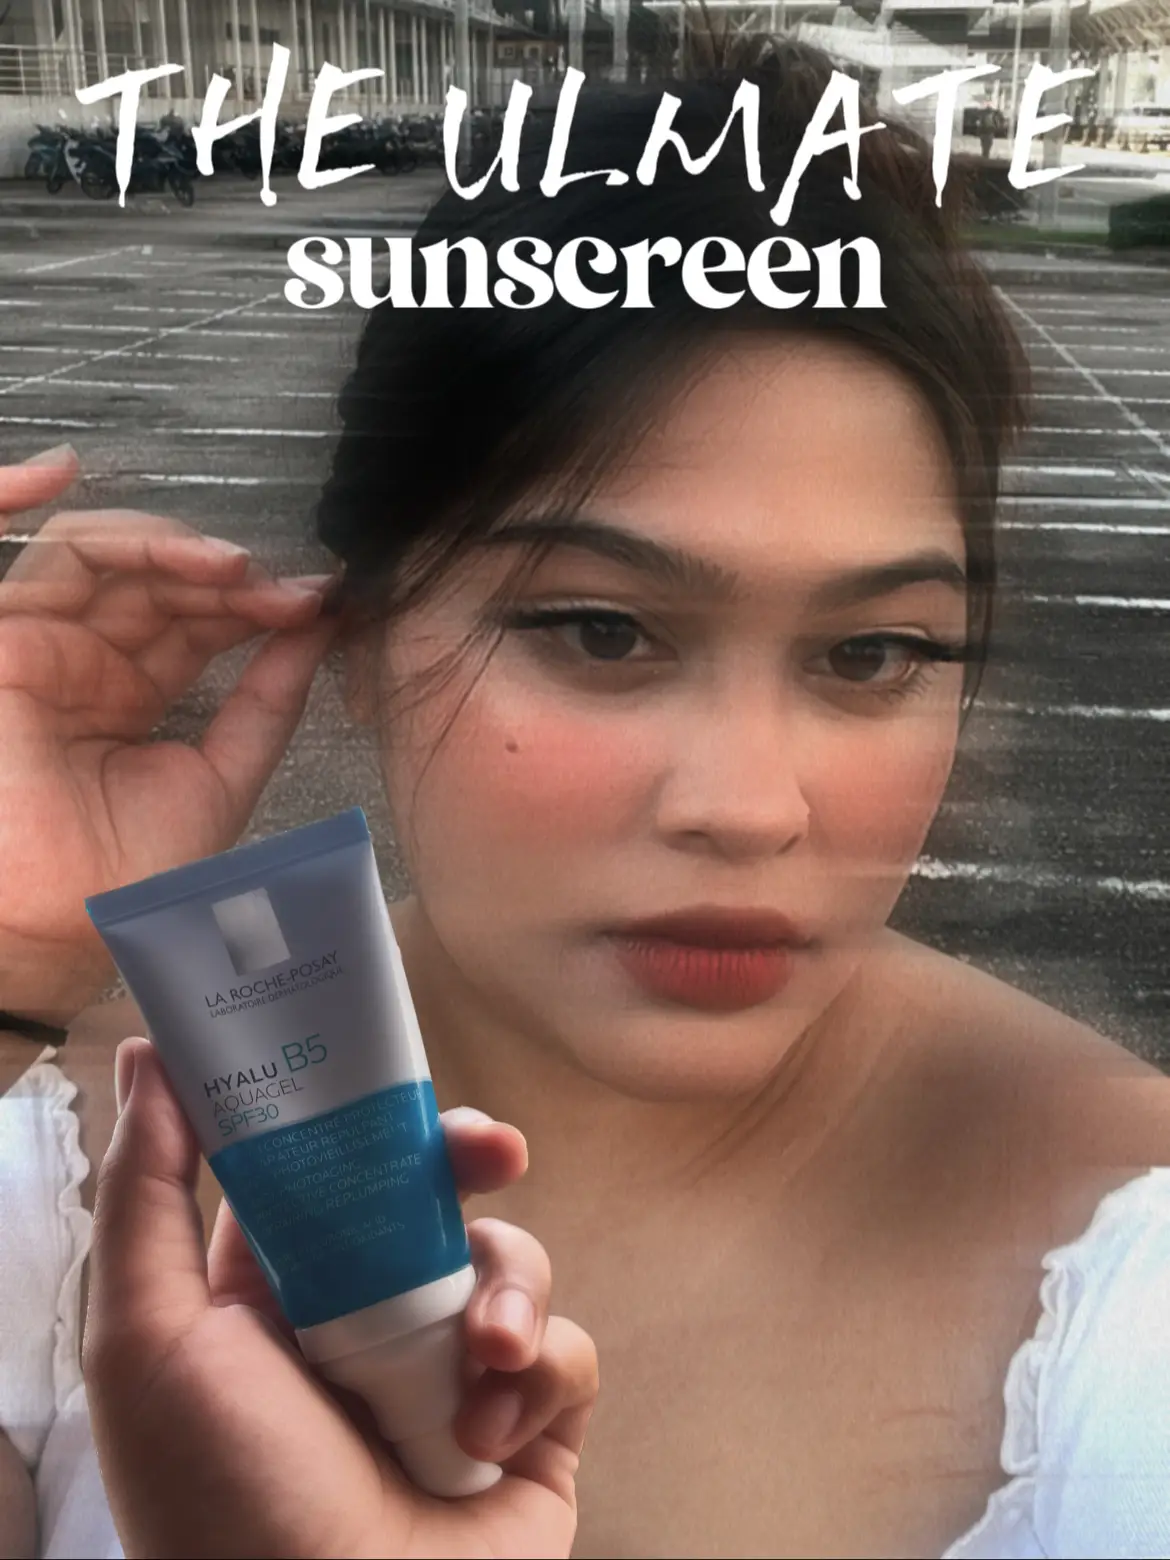 I HATED SUNSCREENS TILL I FOUND THIS 😭😡's images